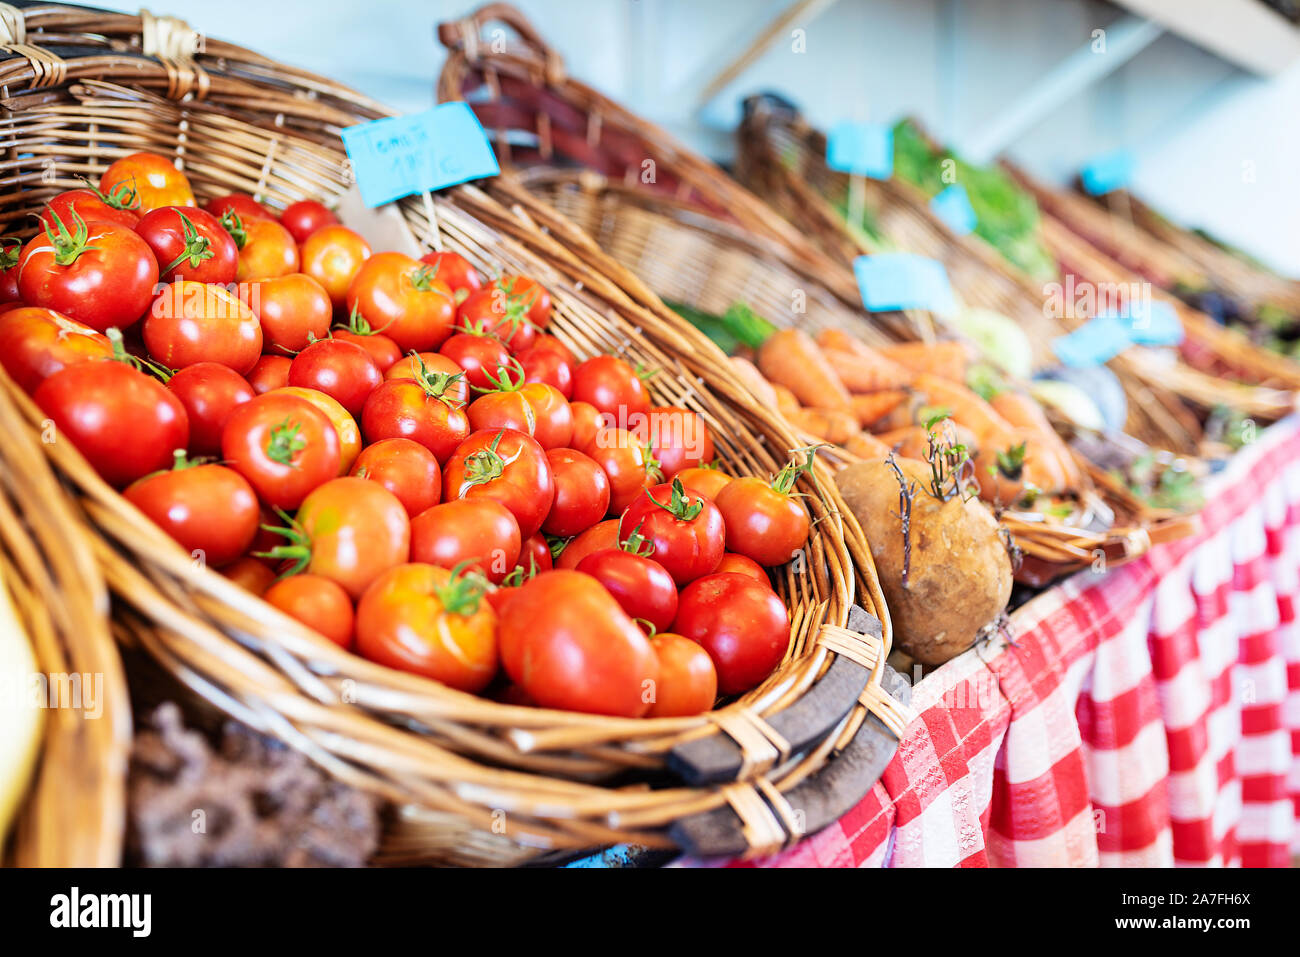 close-up of fresh ripe organic tomatoes in wicker basket at market stall Stock Photo